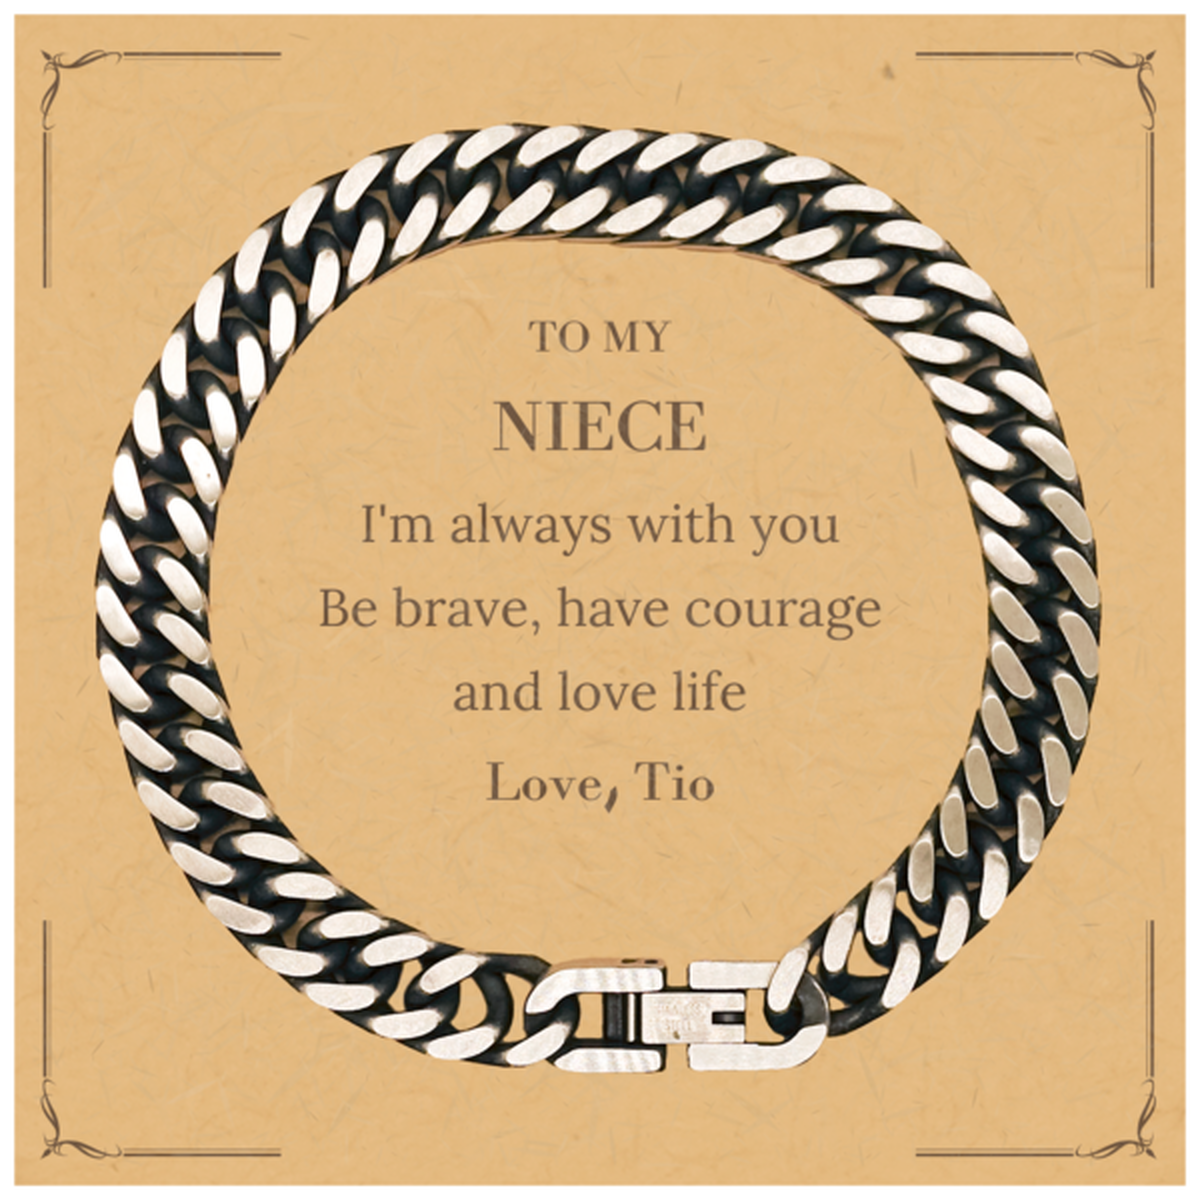 To My Niece Gifts from Tio, Unique Cuban Link Chain Bracelet Inspirational Christmas Birthday Graduation Gifts for Niece I'm always with you. Be brave, have courage and love life. Love, Tio